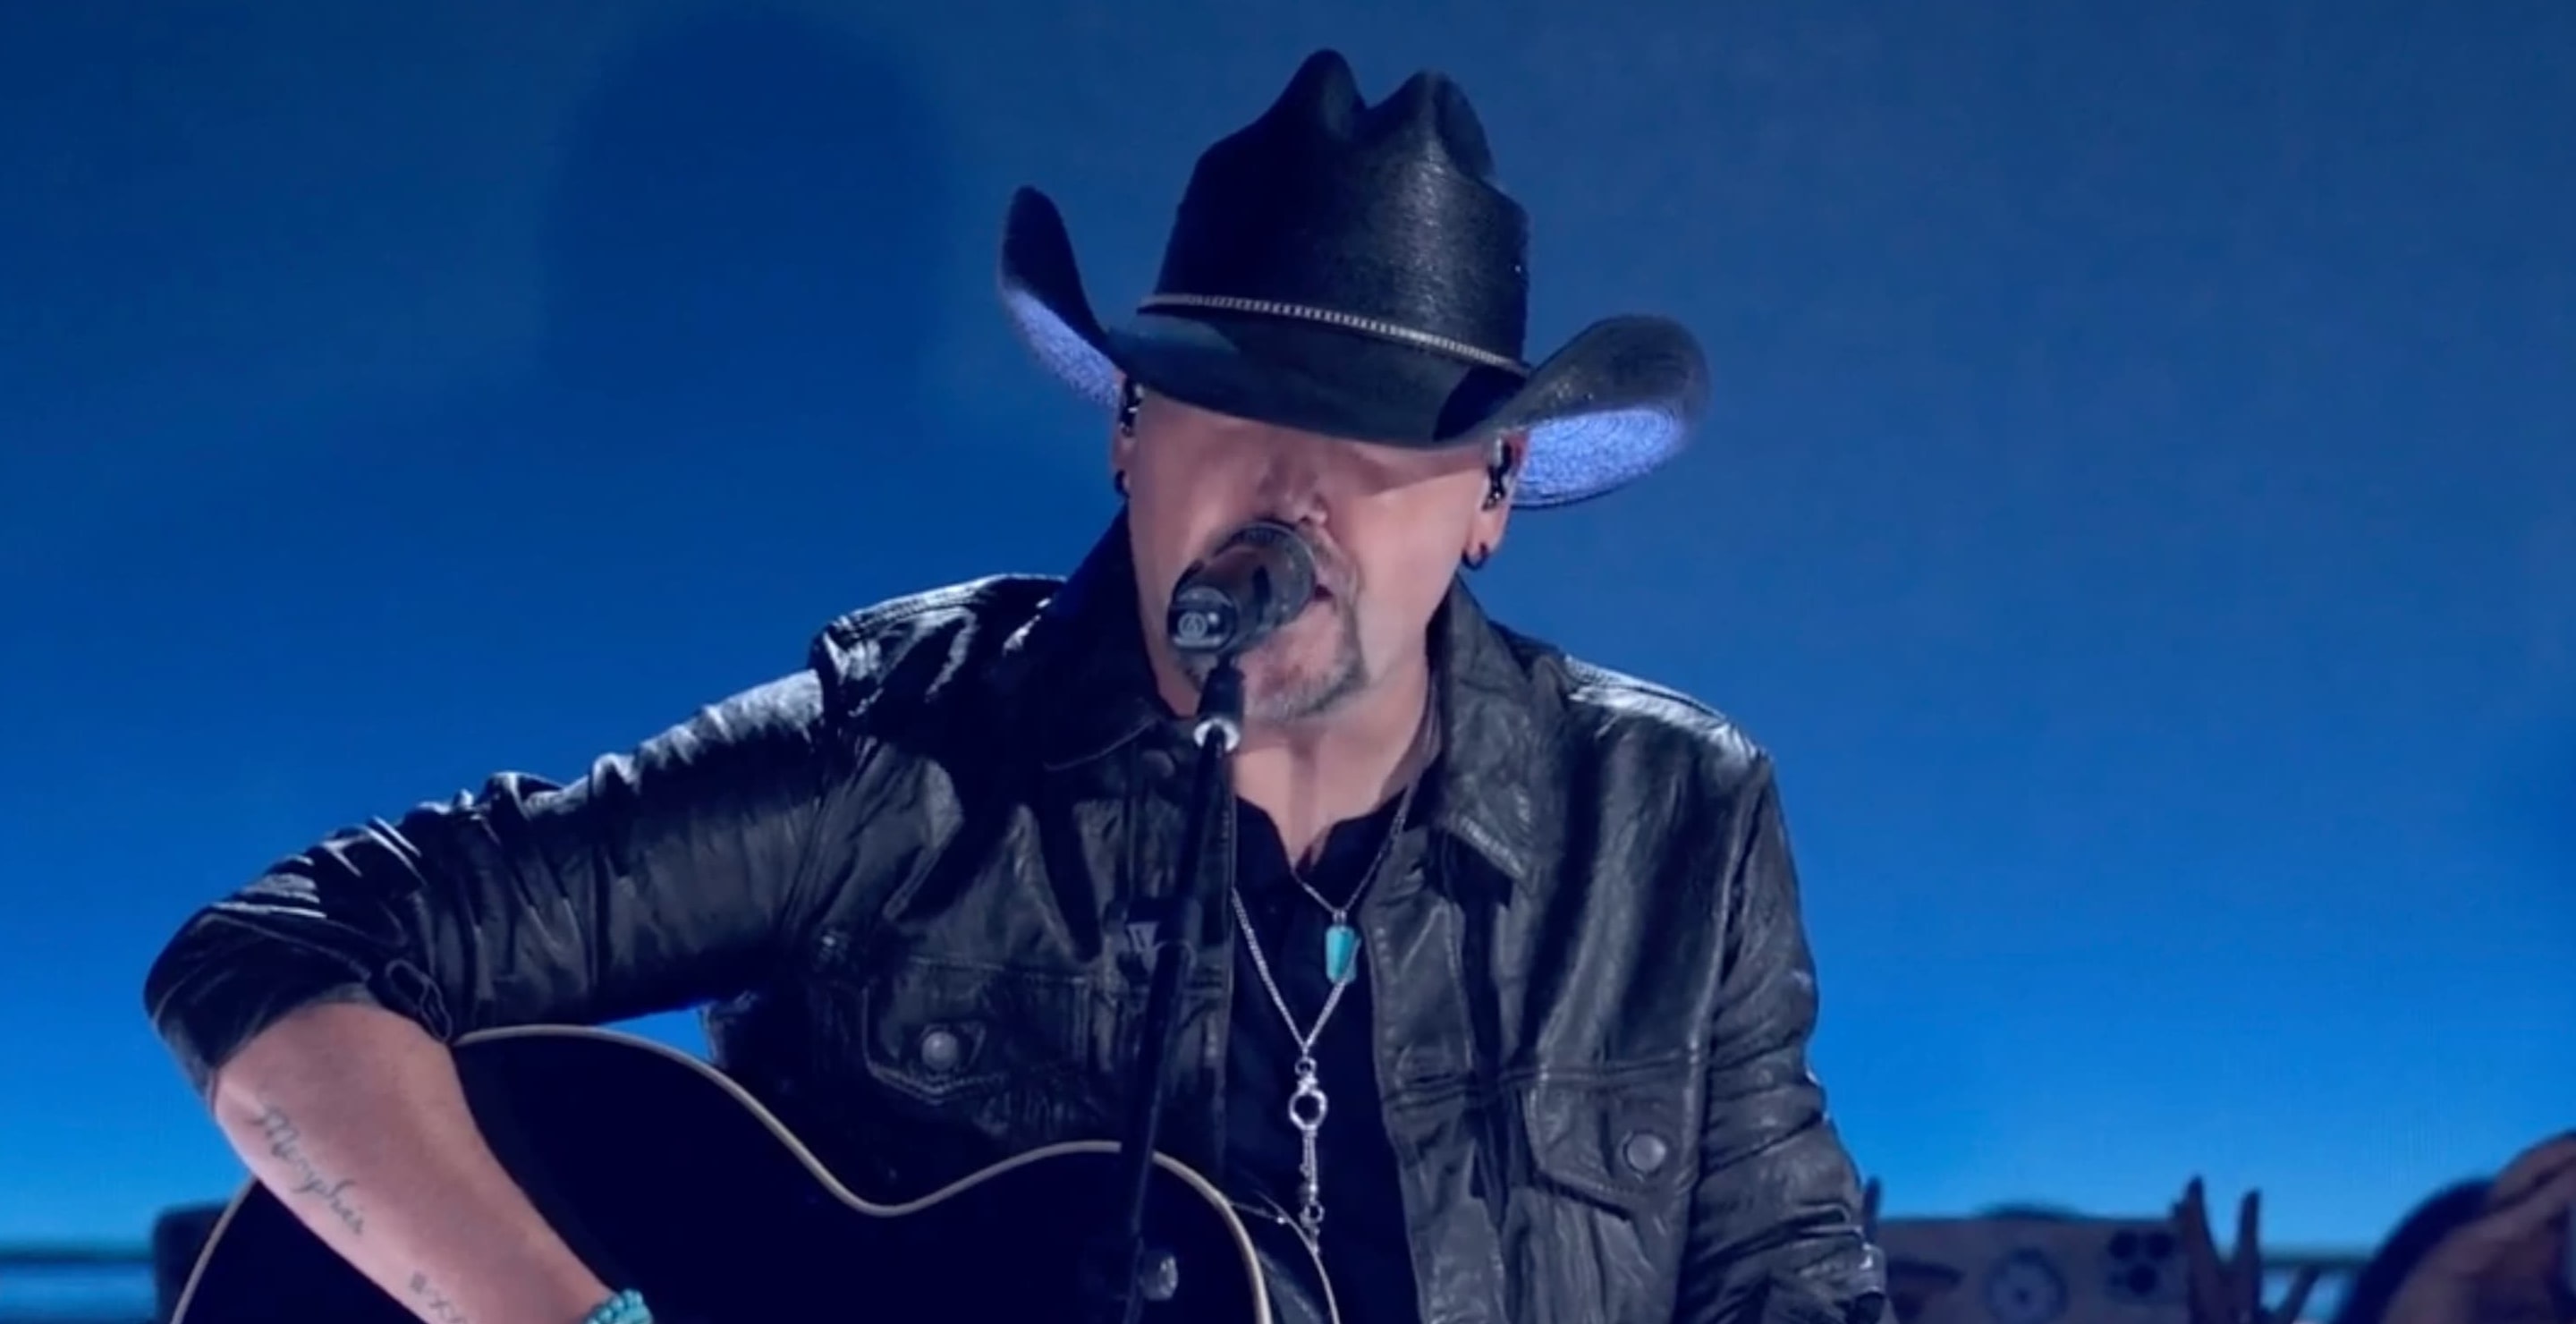 Jason Aldean Performs a Heartfelt Toby Keith Tribute at the ACM Awards